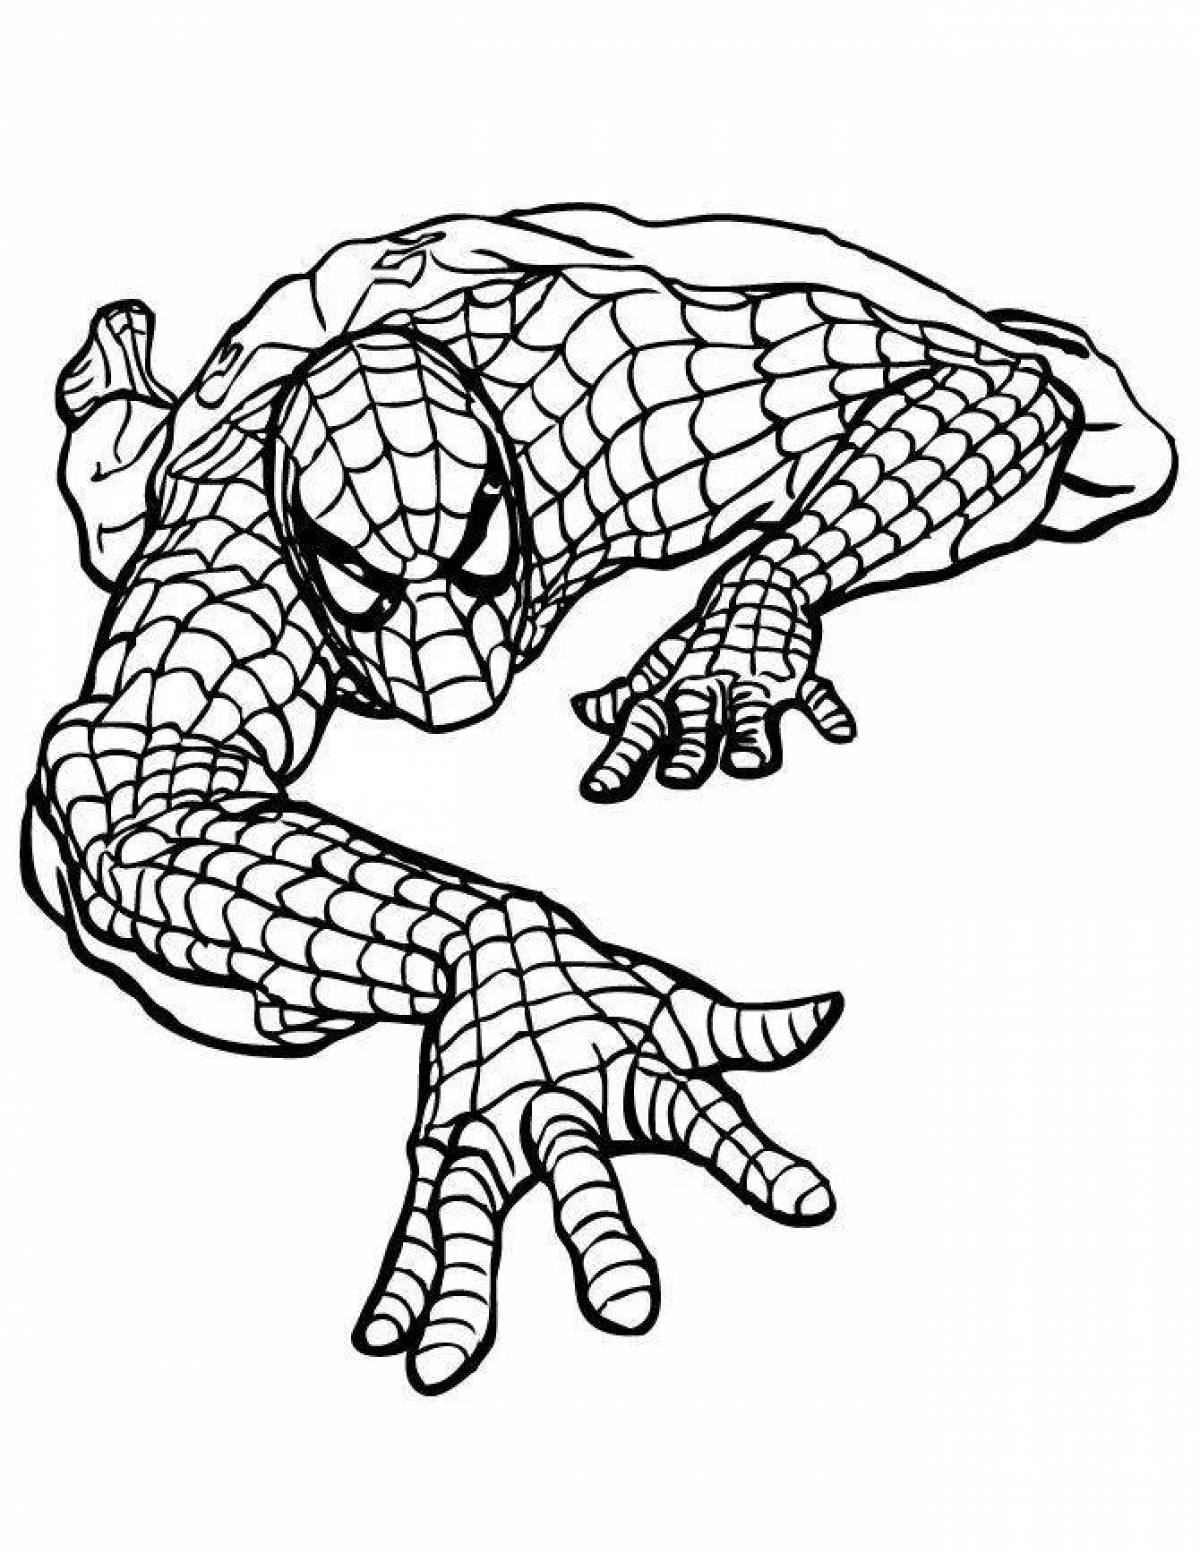 Marvel spiderman fine coloring page